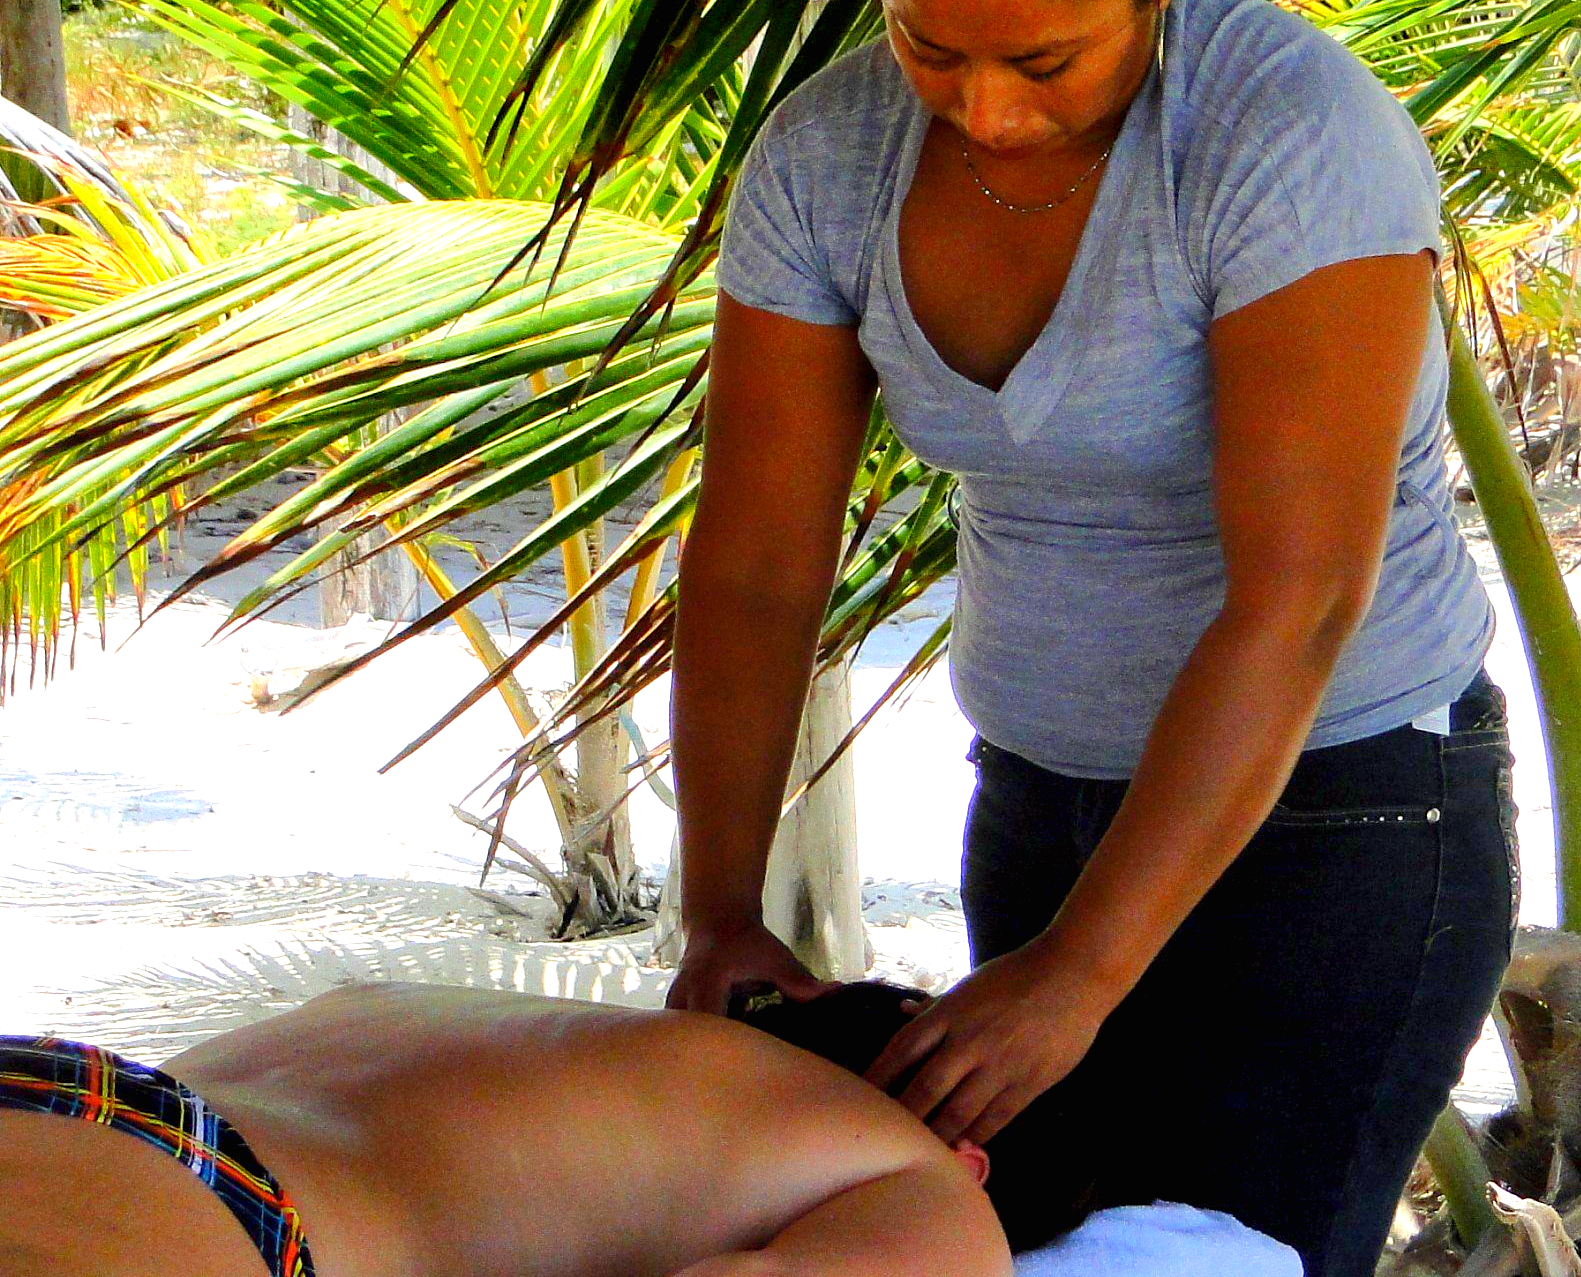 Massage, deep tissue or relaxation